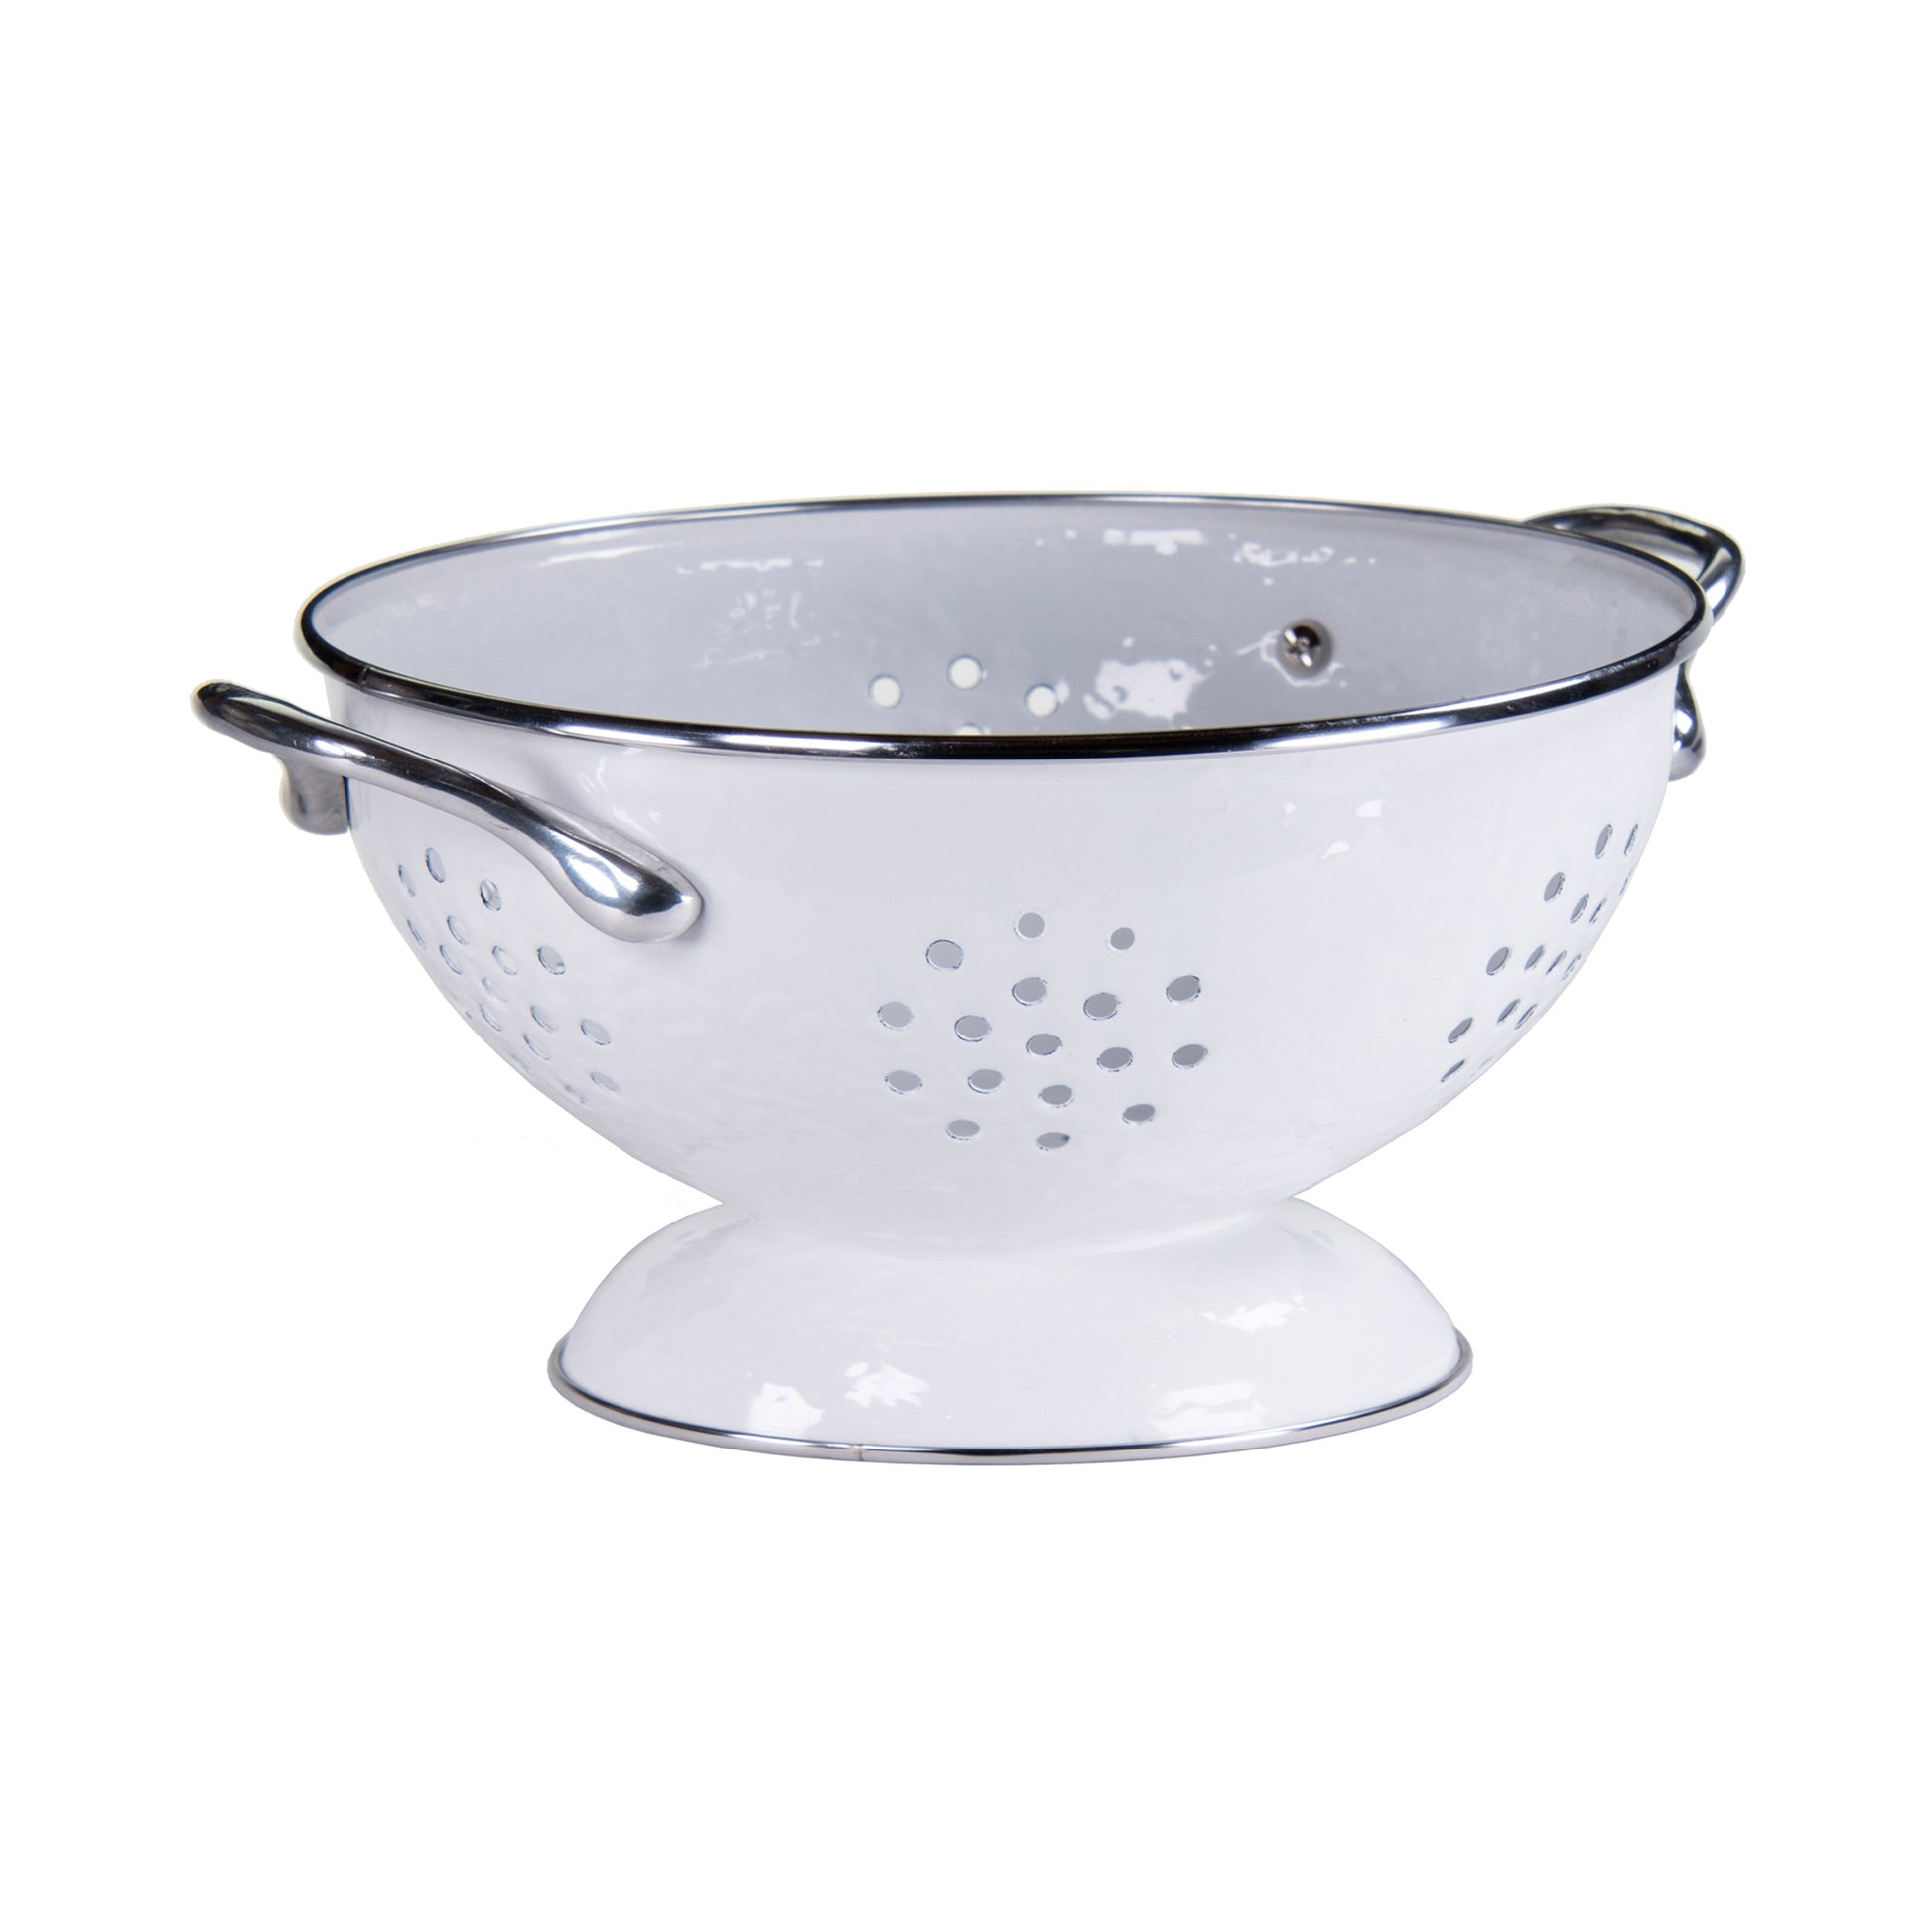 Enamel Colander-Colanders & Strainers-Nautical Decor and Gifts